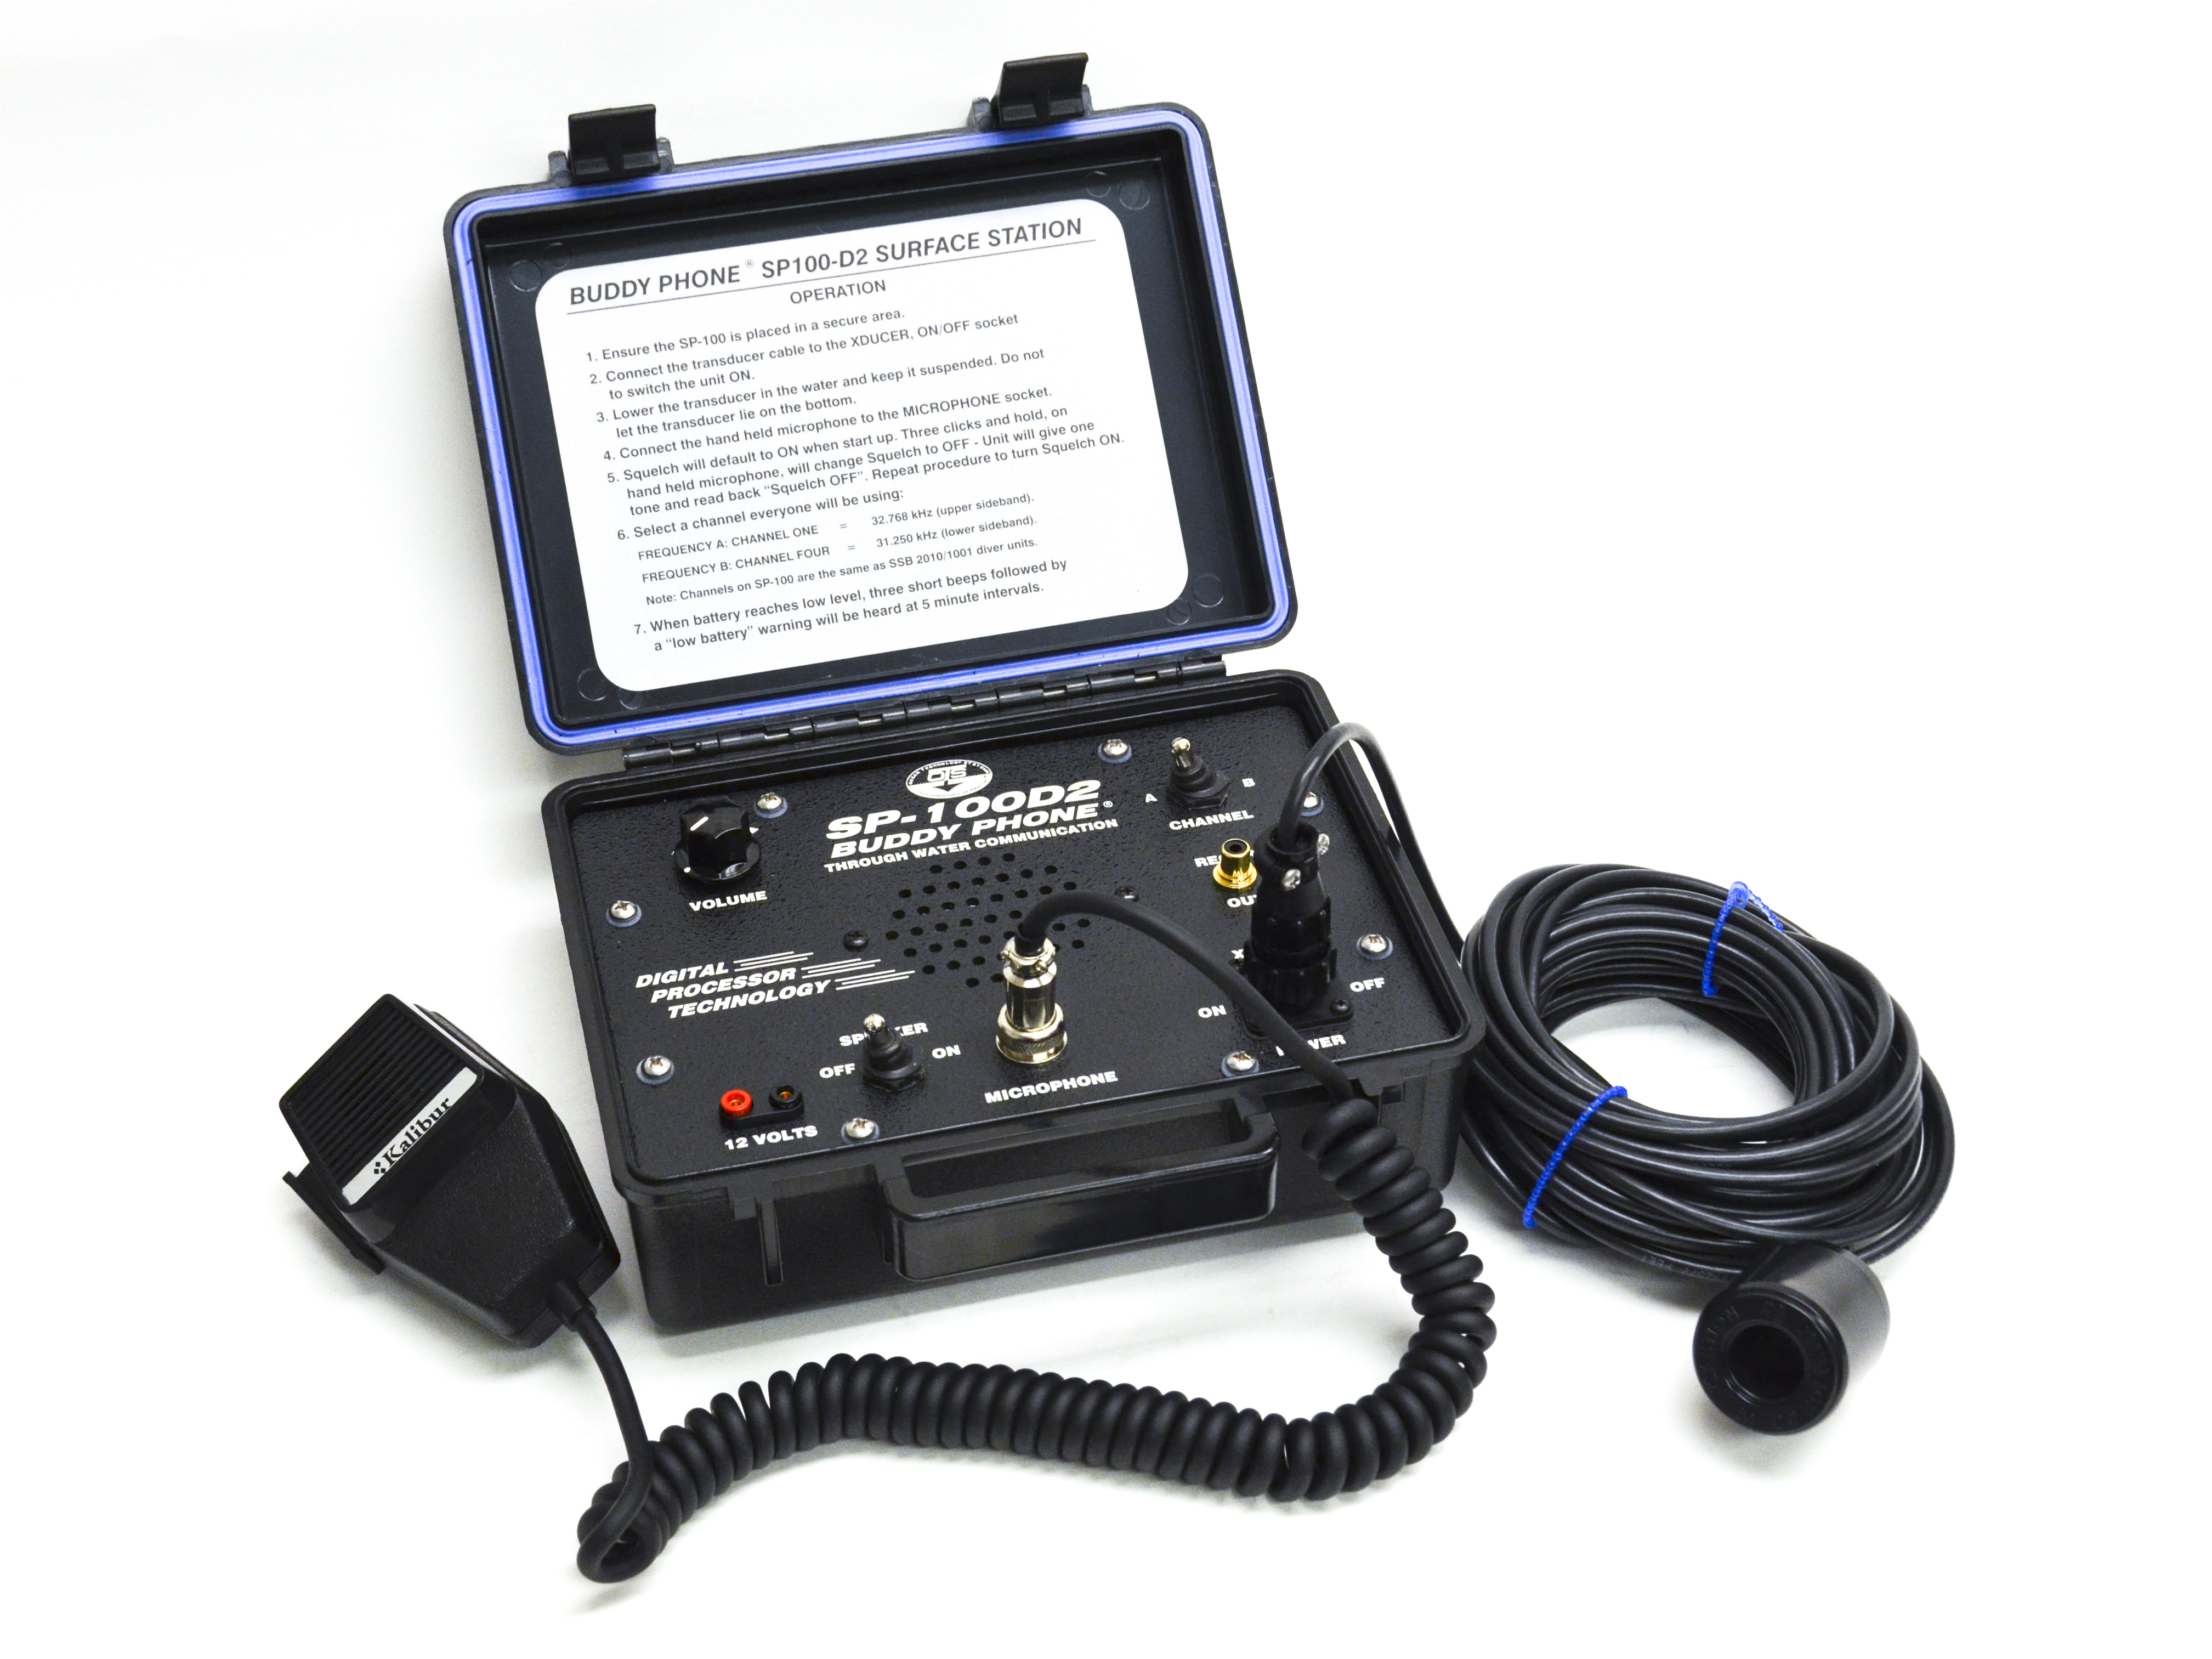 OTS SP-100D-2 BUDDY PHONE 2 CHANNEL SURFACE STATION